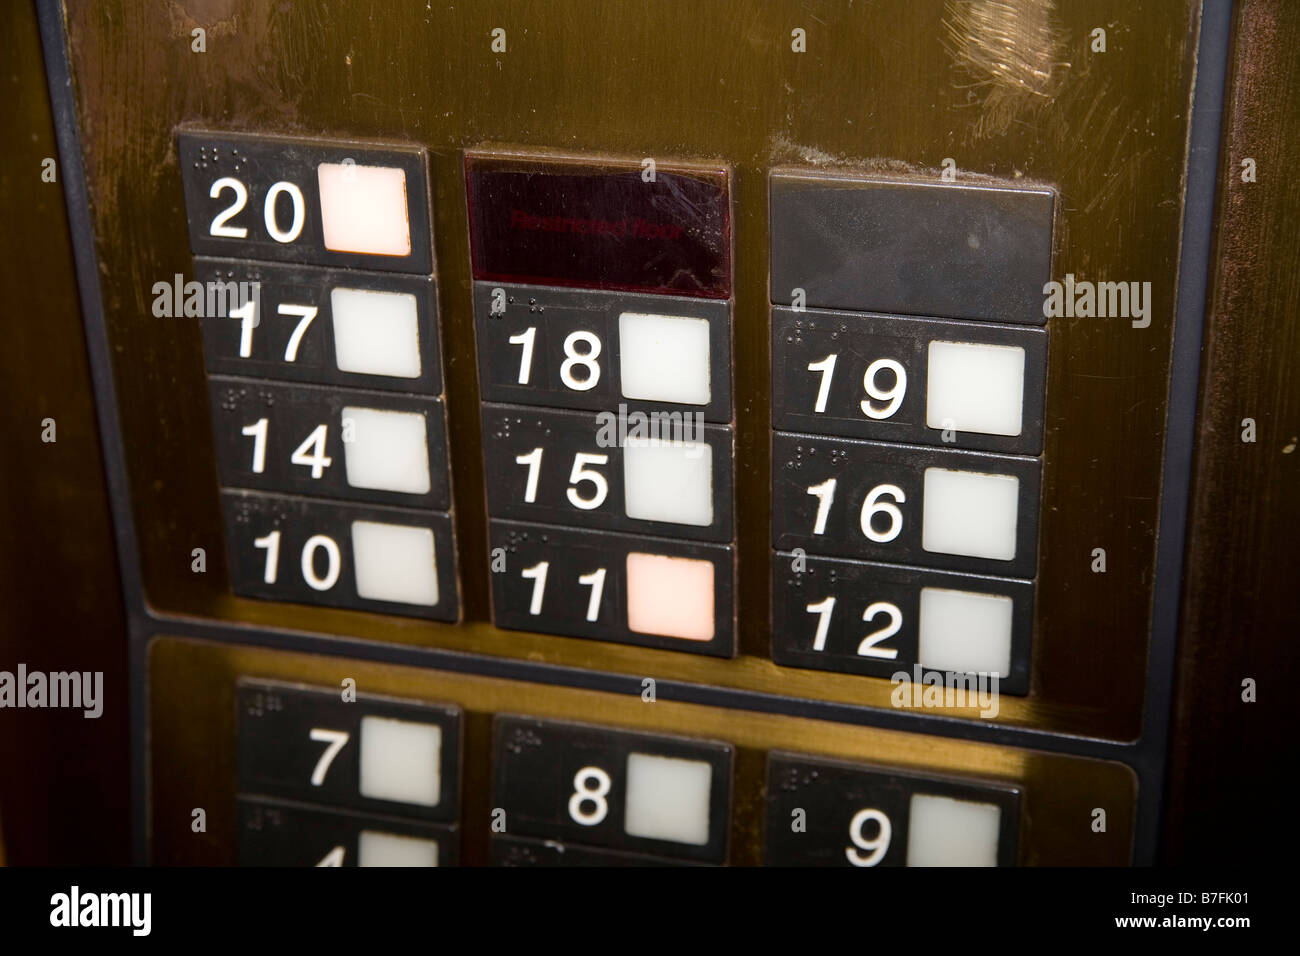 Buttons on elevator panel show no 13th floor humoring those who think 13 is an unlucky number Stock Photo